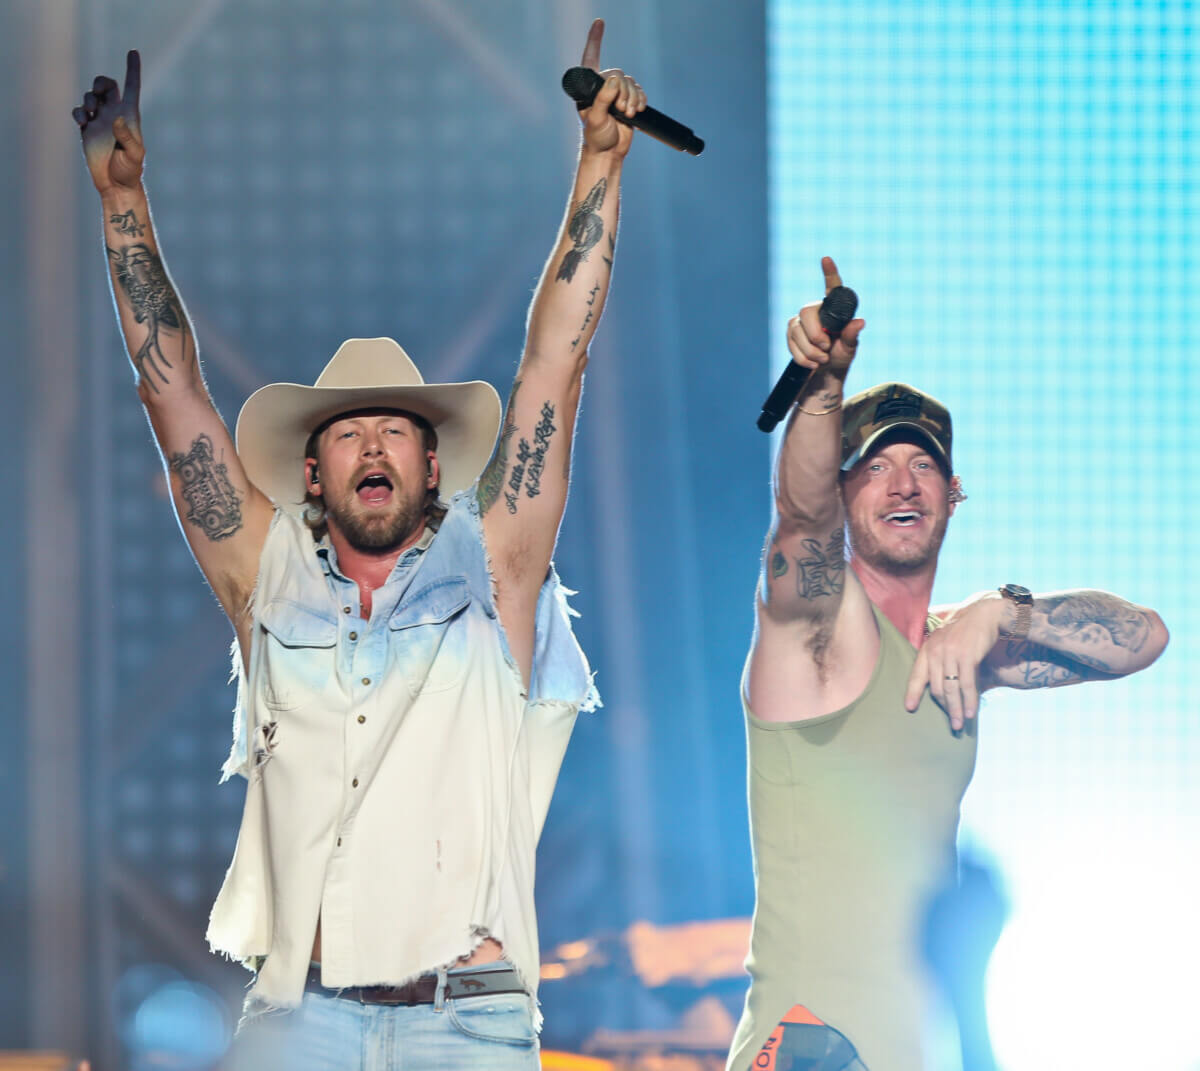 Brian Kelley, (L) and Tyler Hubbard of Florida Georgia Line perform in New York 2019